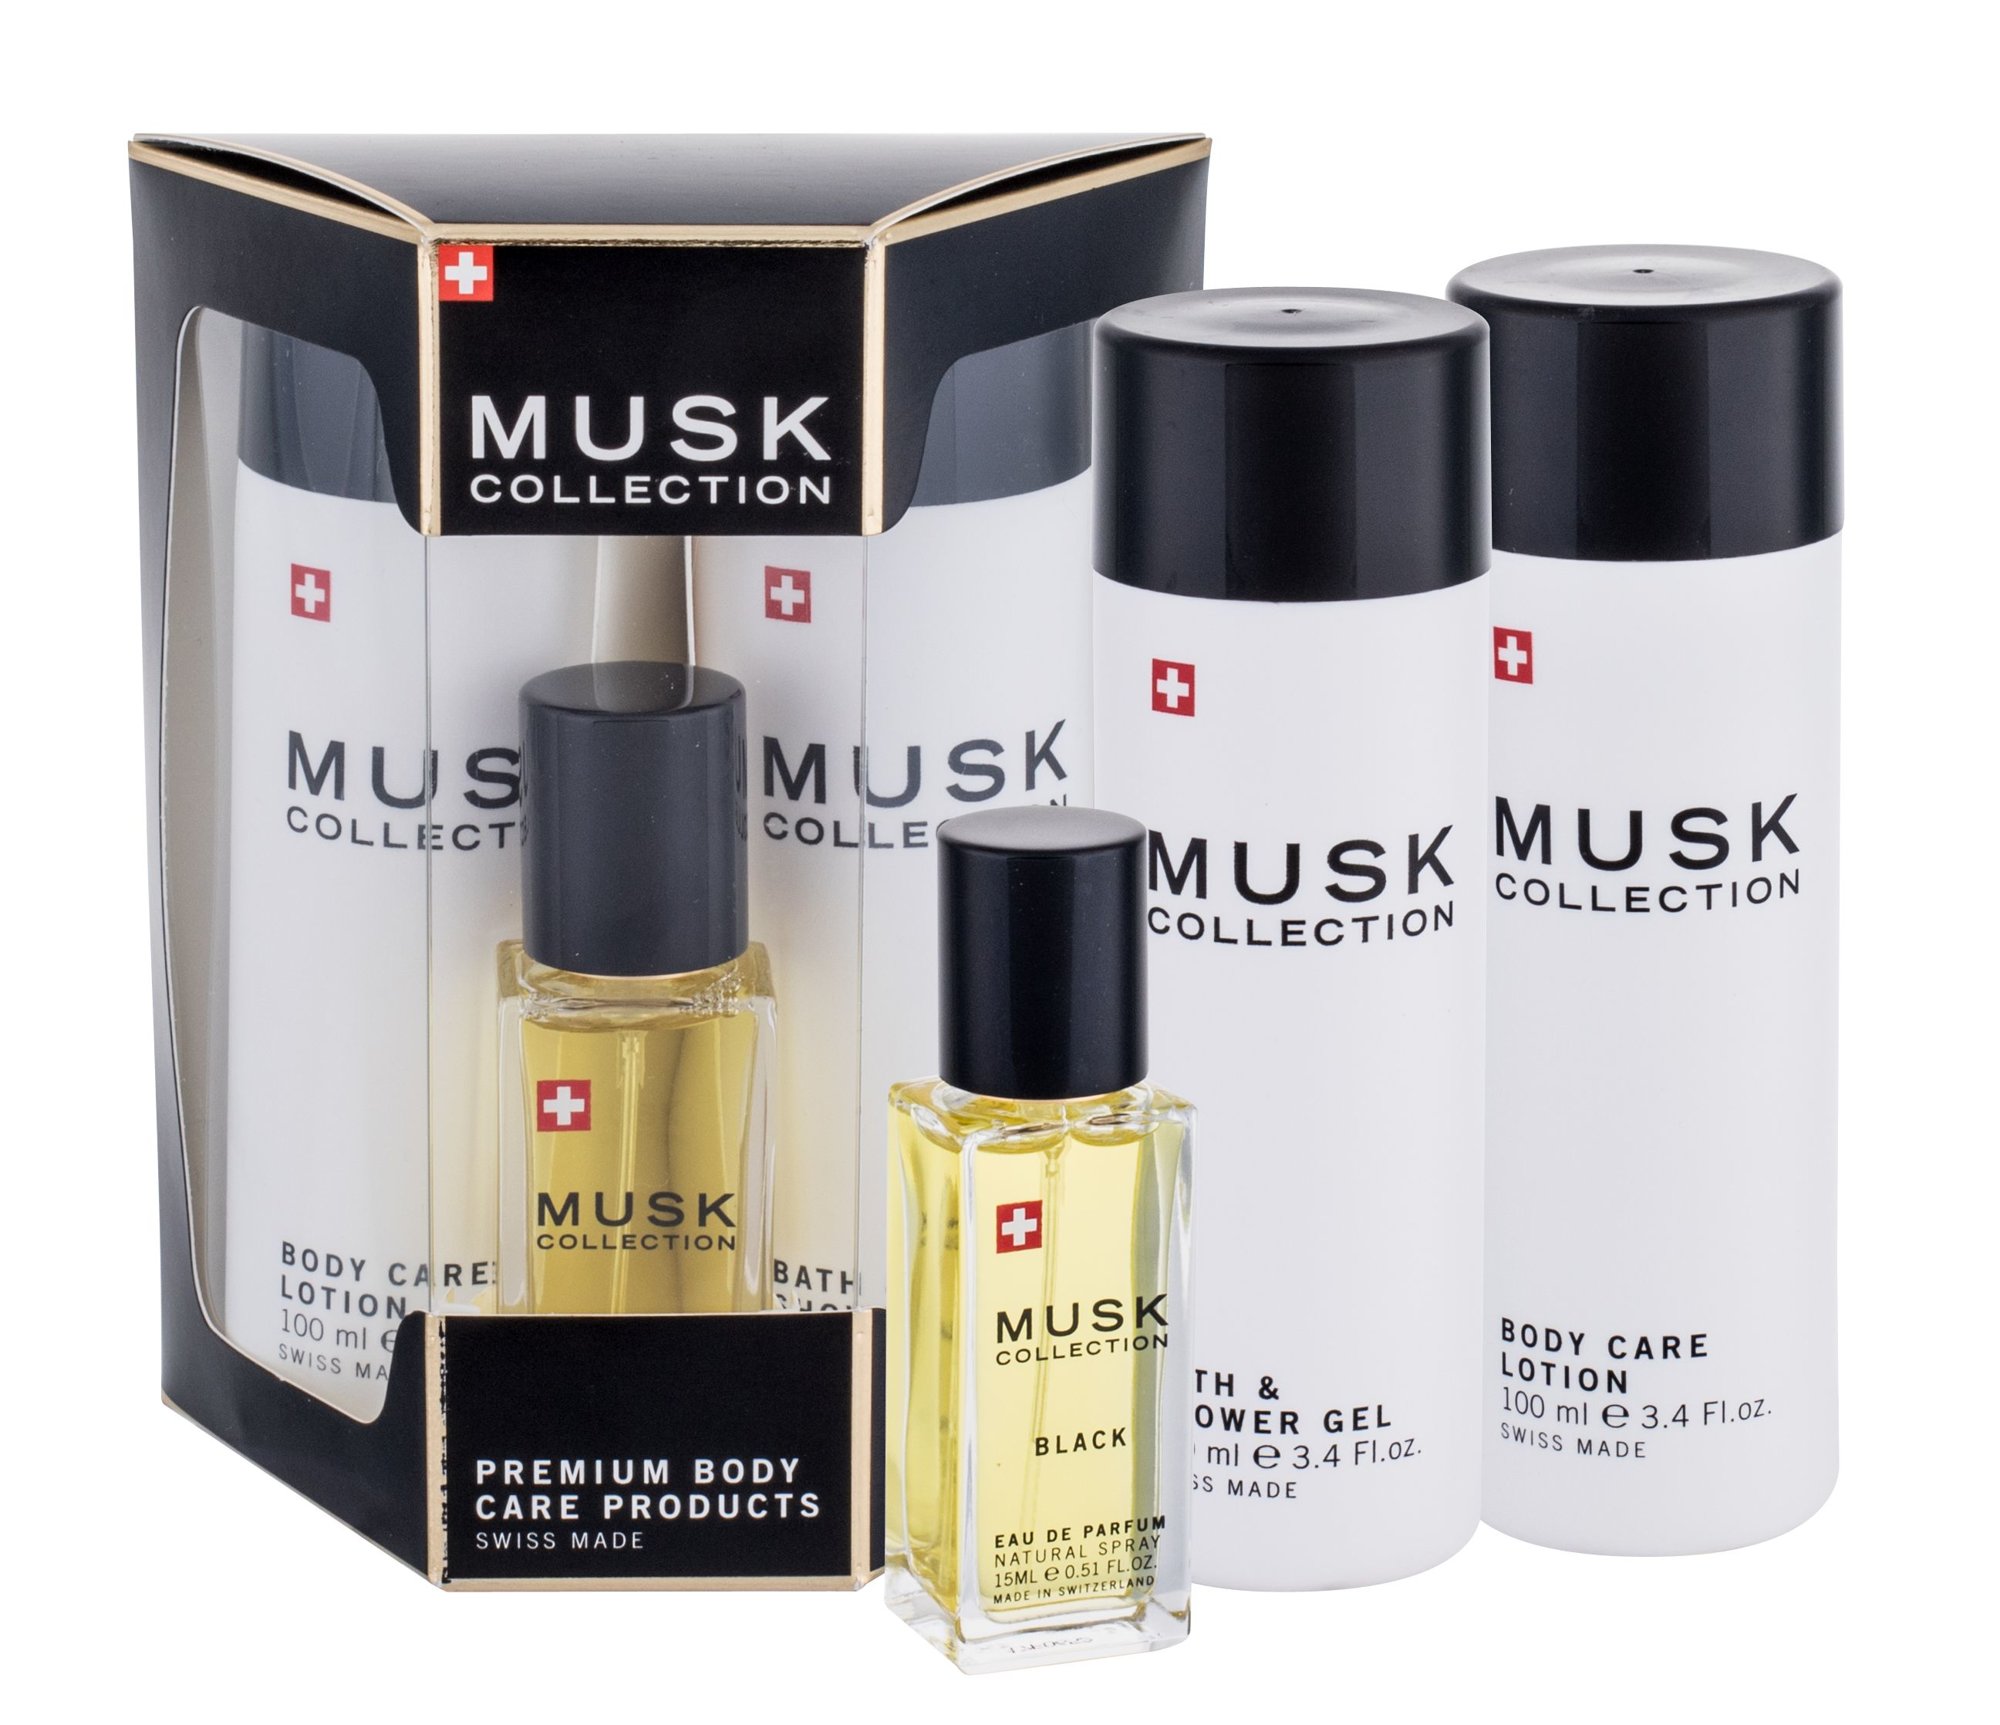 MUSK Collection Musk Collection